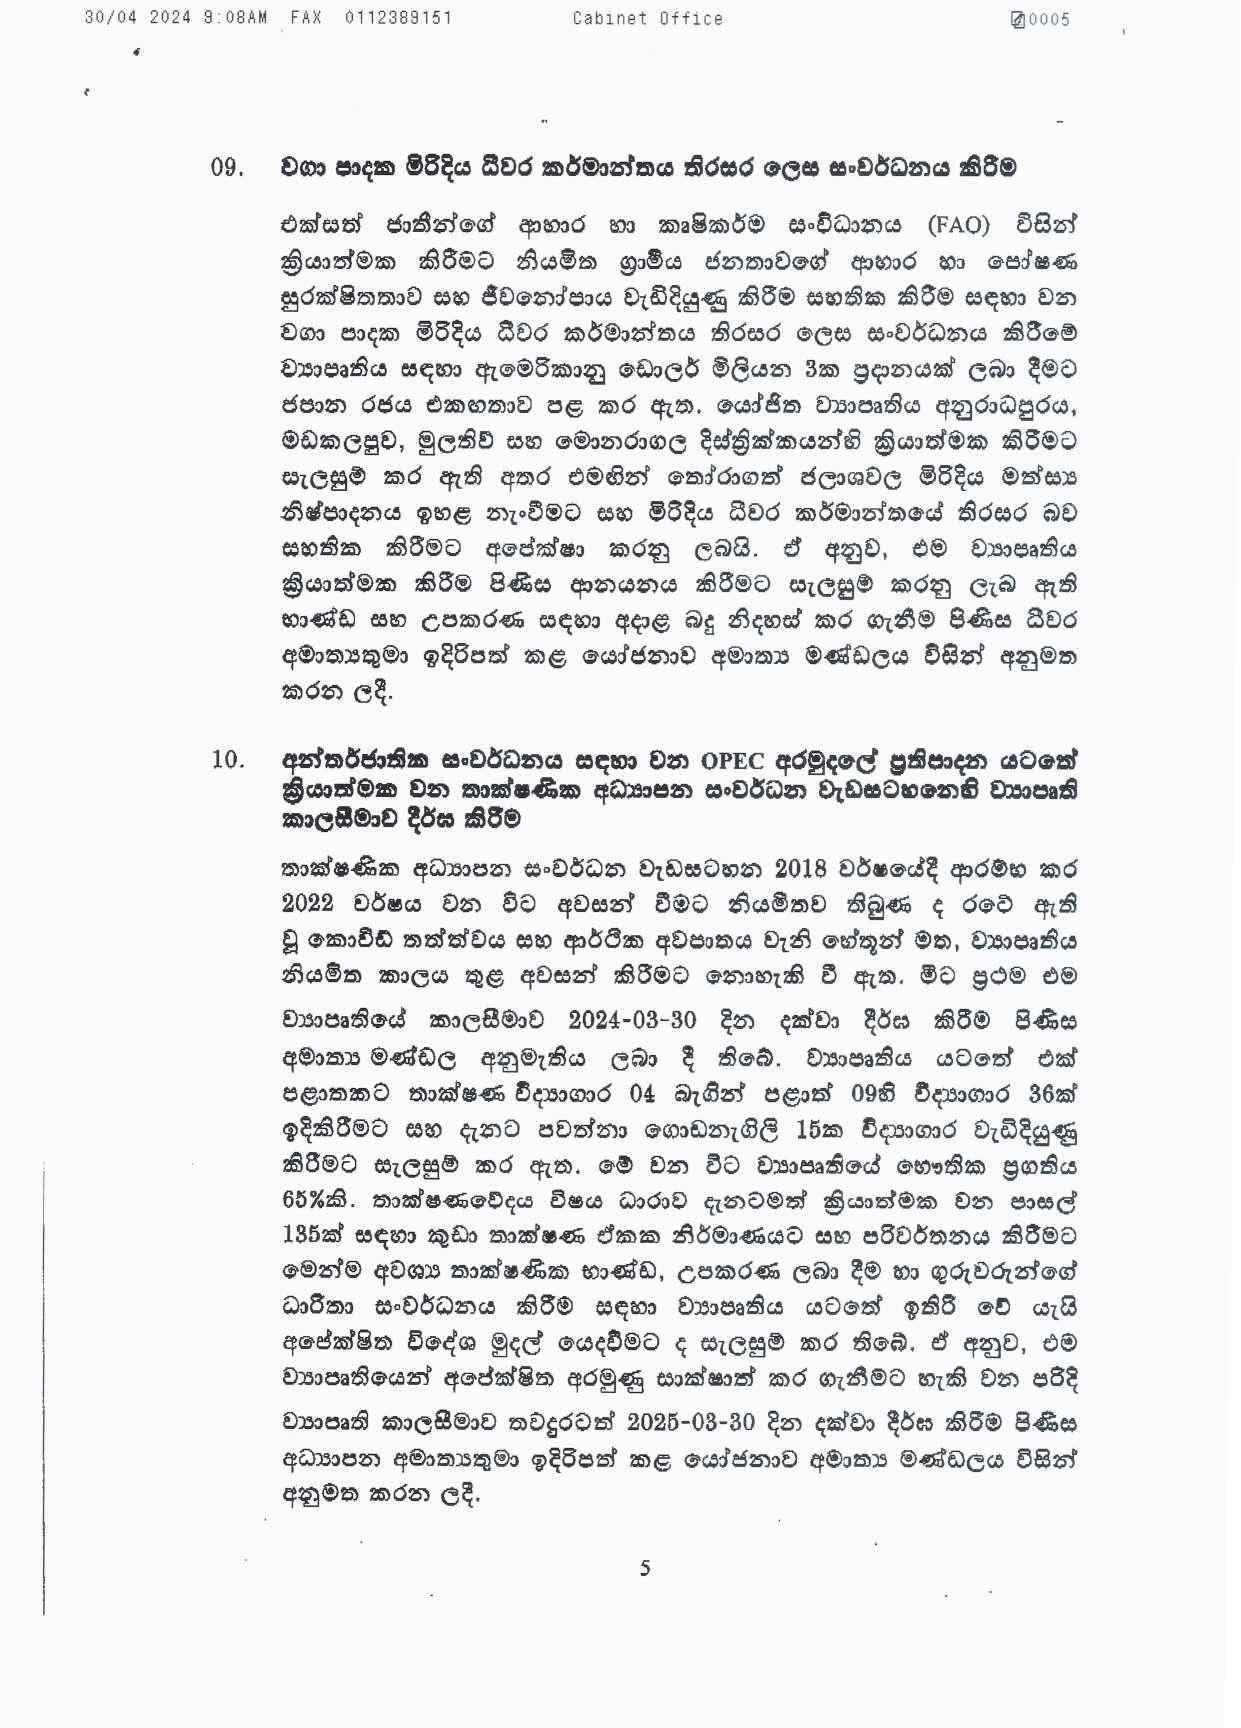 Cabinet Decision on 29.04.2024 page 005